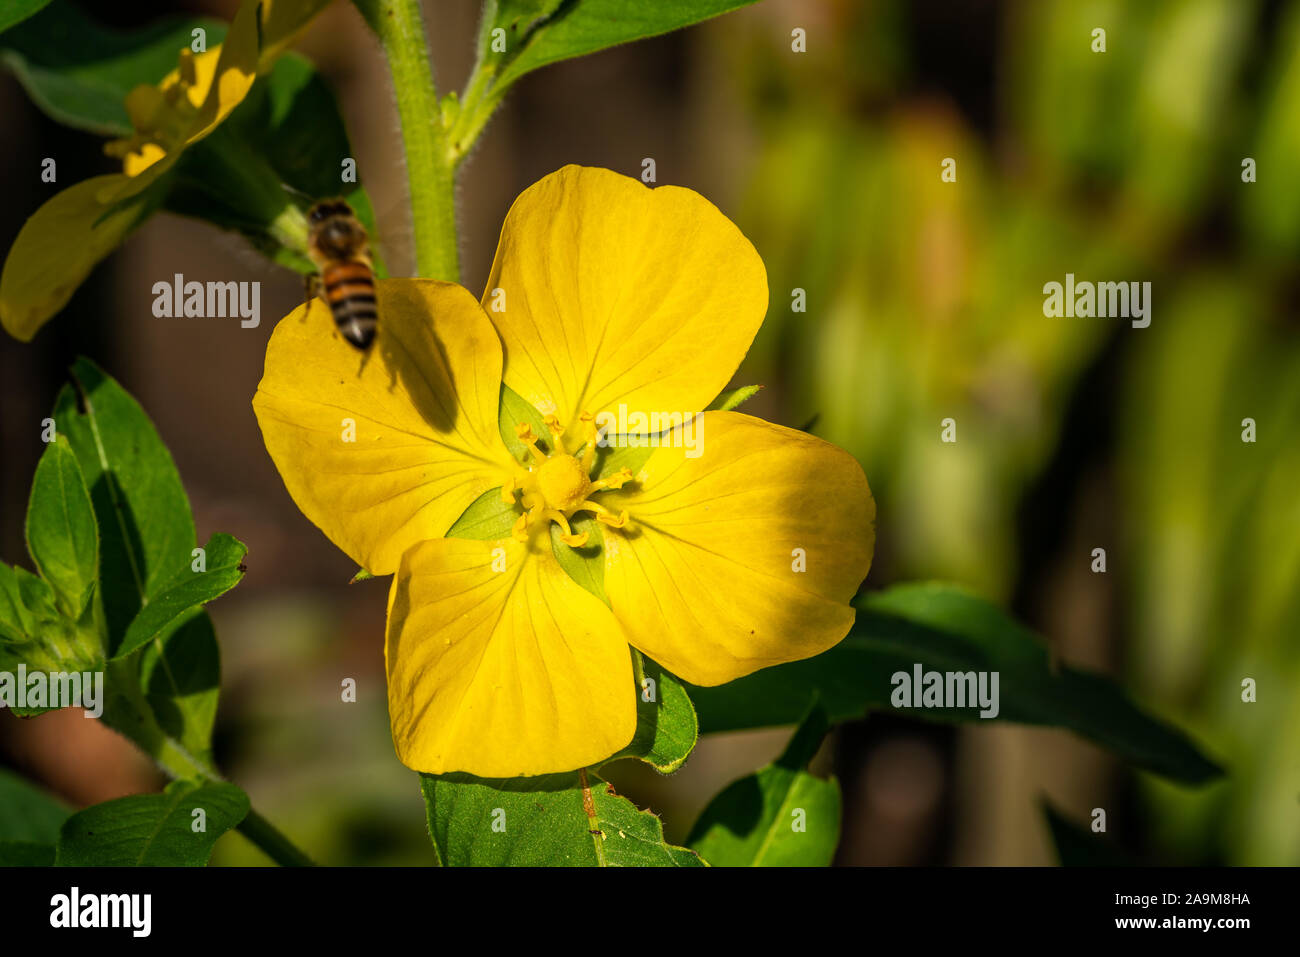 A honey bee getting some pollen from a beautiful yellow flower. Stock Photo